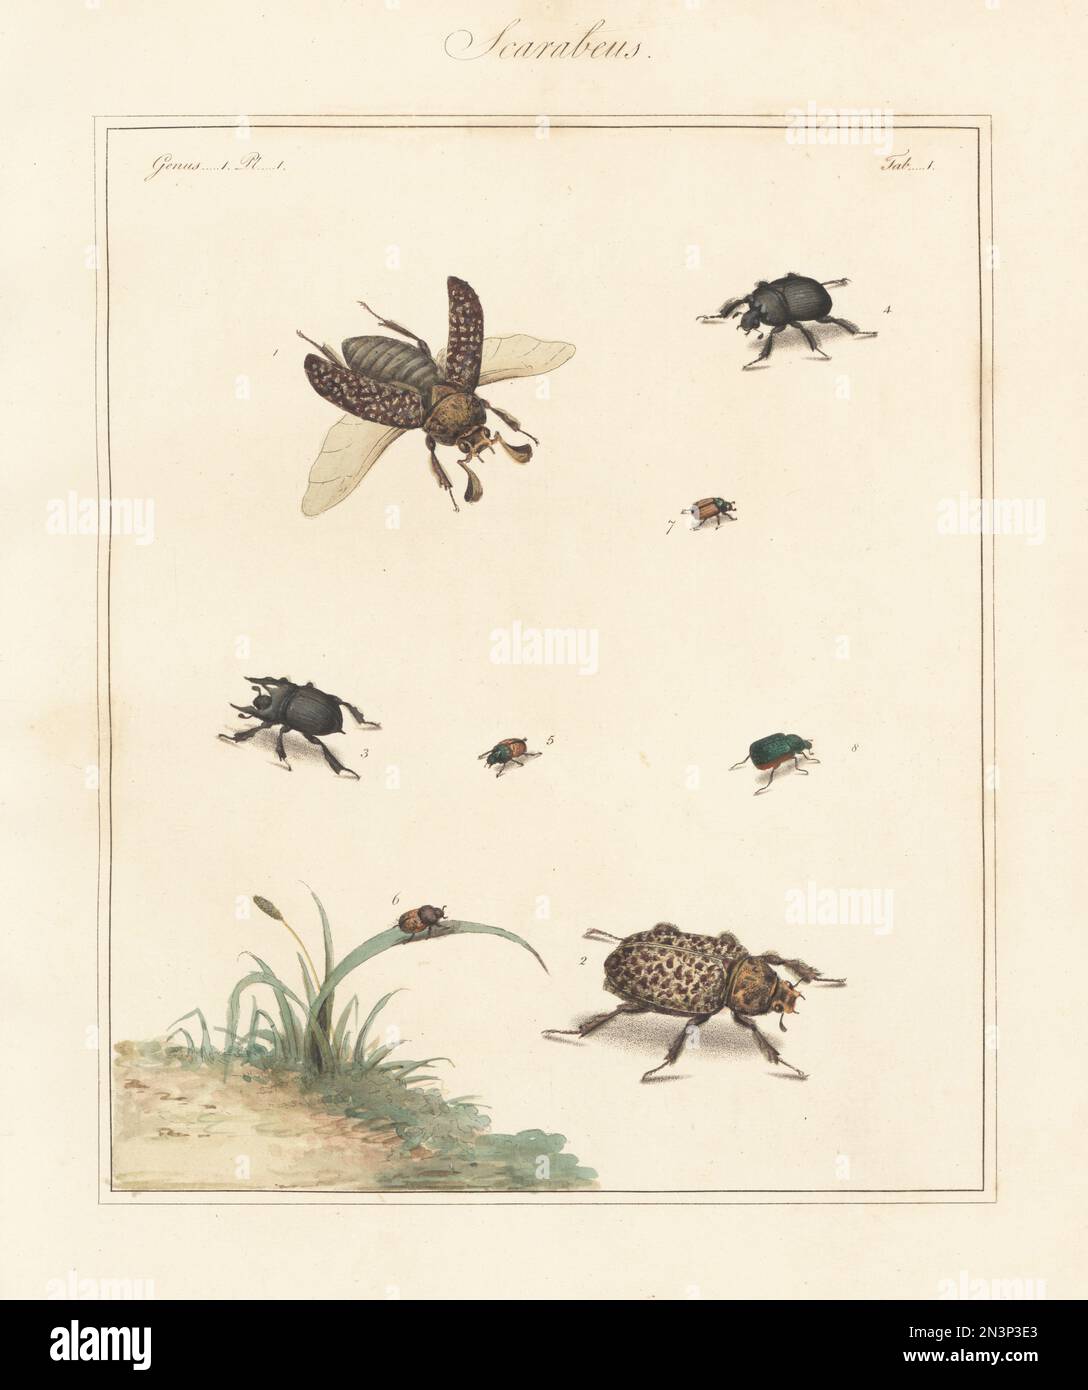 Scarab beetle, Polyphylla (Polyphylla) fullo 1,2, minotaur beetle,  Typhaeus typhoeus 3,4, mottled dung beetle, Onthophagus nuchicornis 5,6, Omaloplia ruricola 7 and vine chafer, Anomala vitis 8. Handcoloured copperplate engraving from Thomas Martyn’s The English Entomologist, Exhibiting all the Coleopterous Insects found in England, Academy for Illustrating and Painting Natural History, London, 1792. Stock Photo